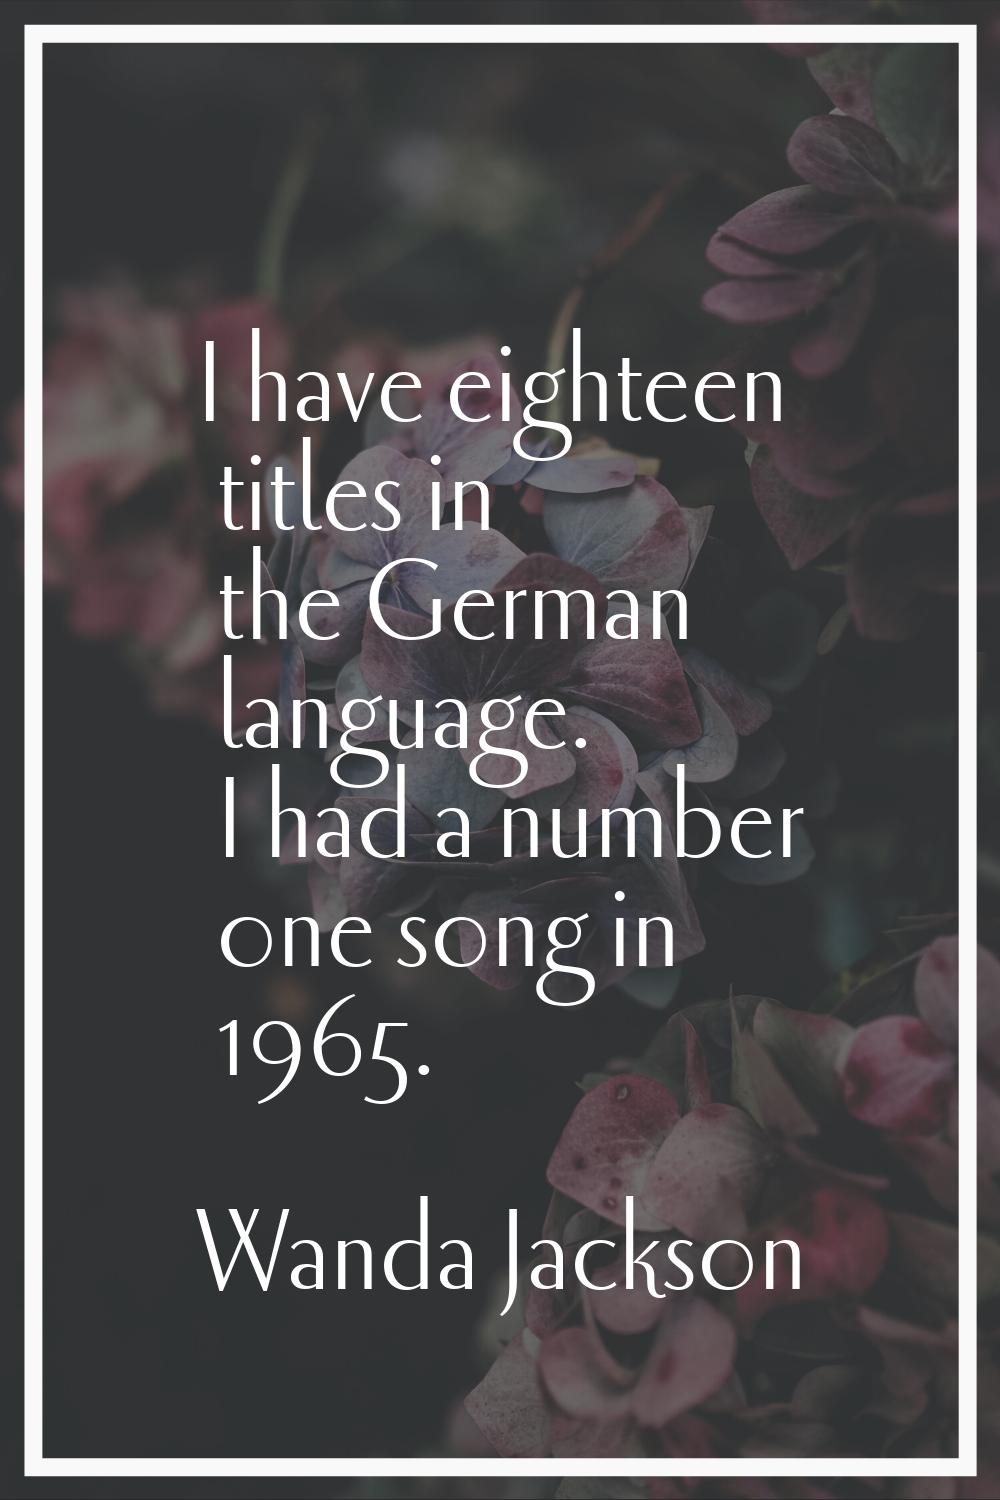 I have eighteen titles in the German language. I had a number one song in 1965.